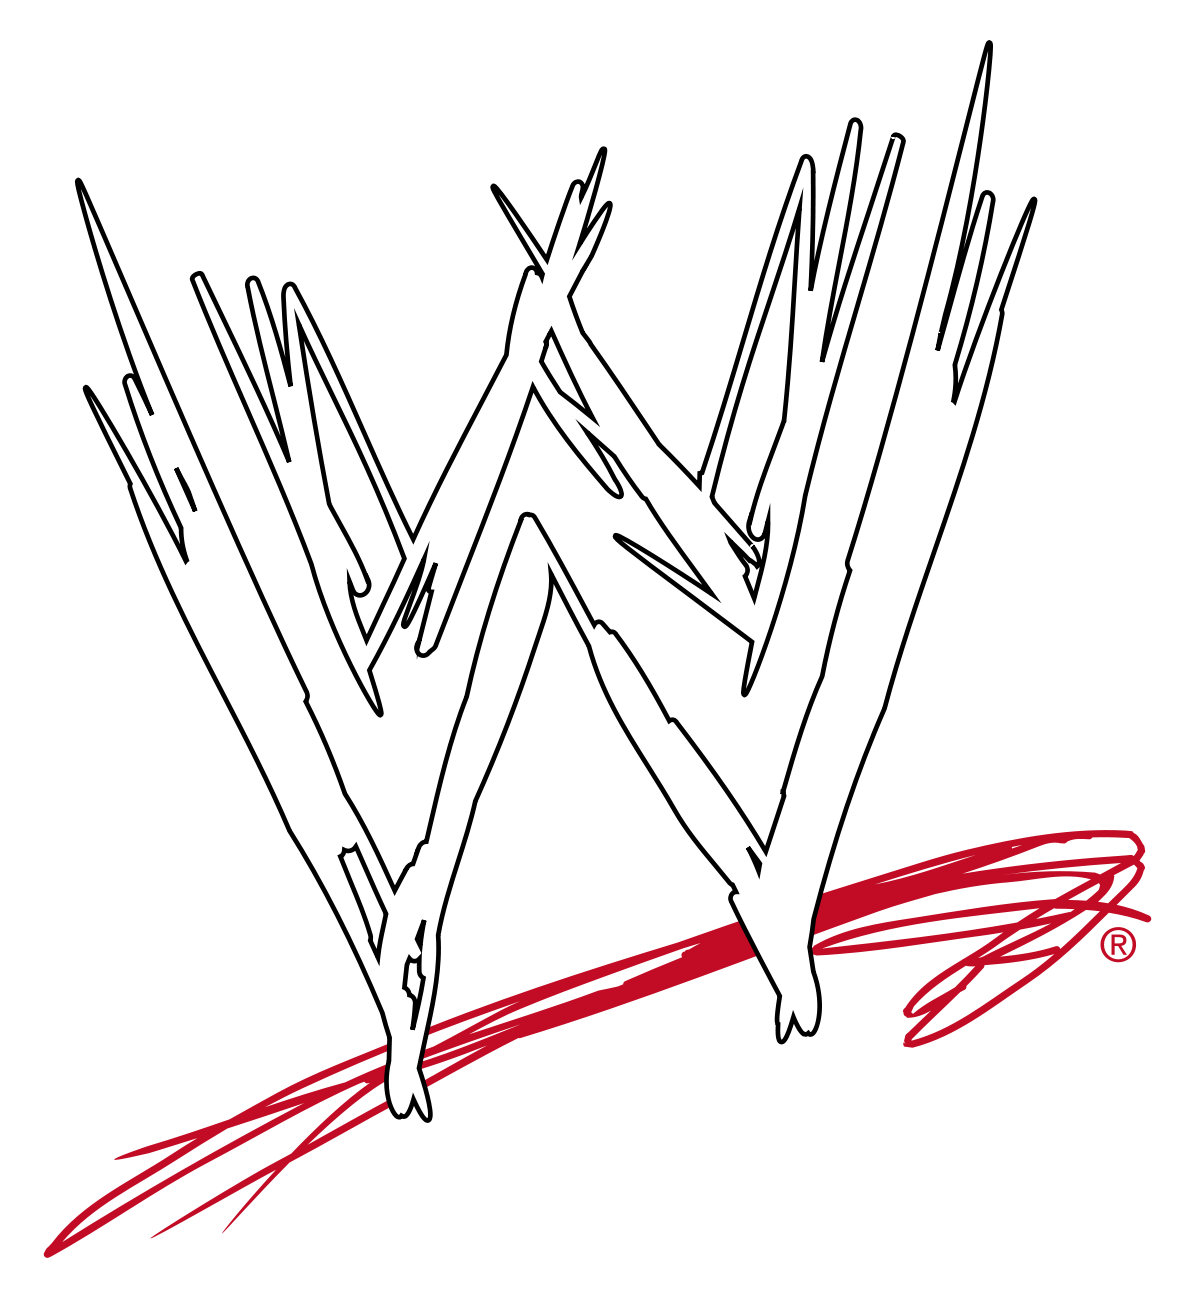 WWE Logo PNG Picture